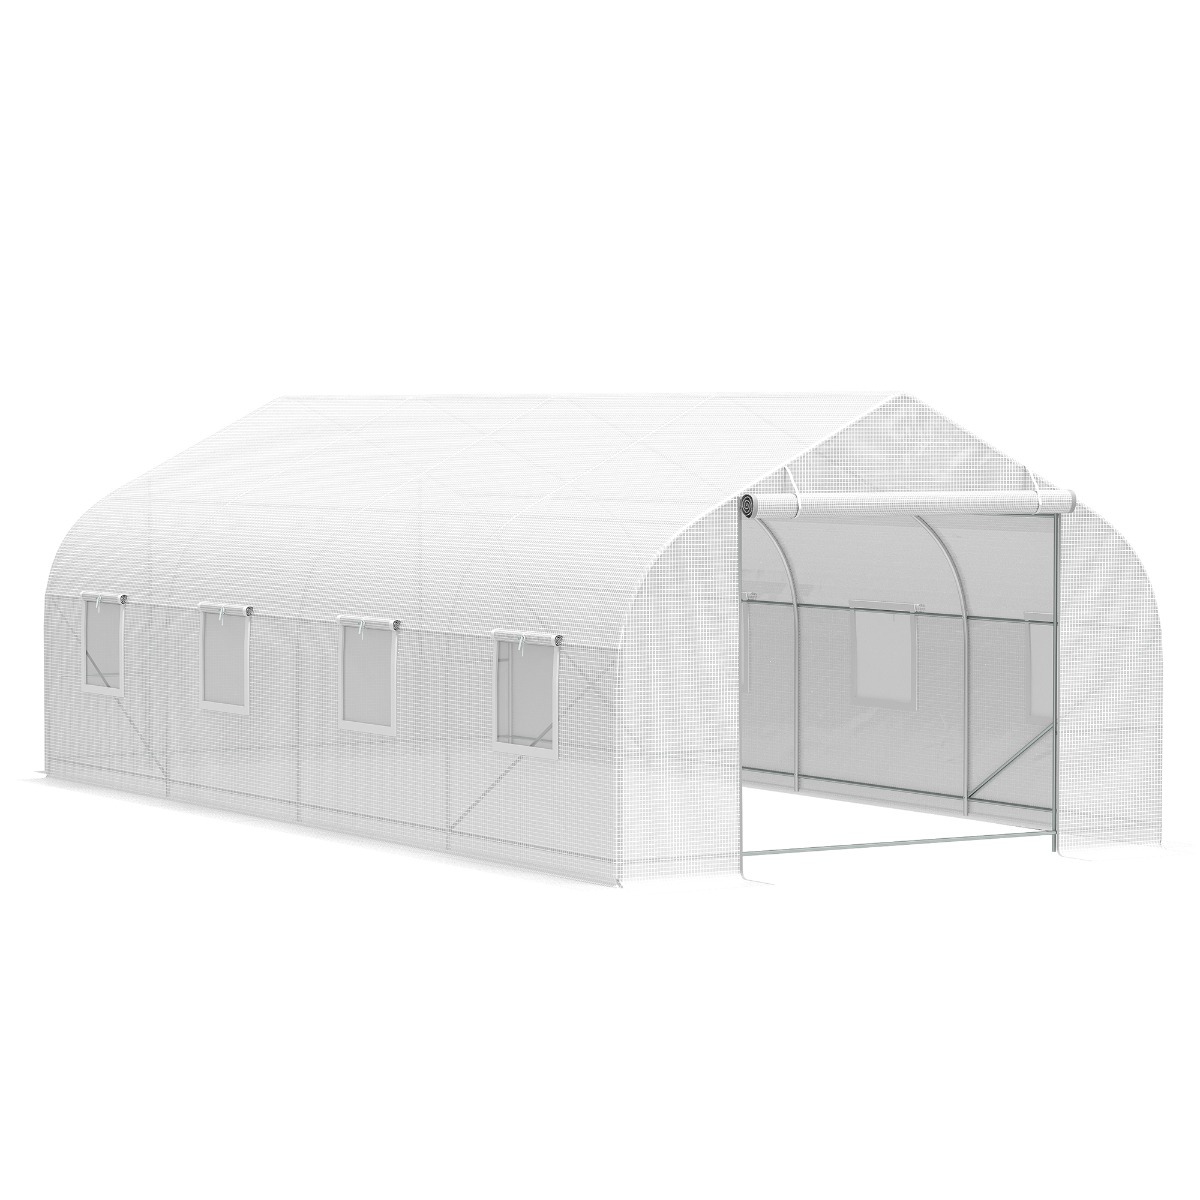 212 Main 845-232WT-1 10 x 20 ft. Outsunny Greenhouse Deluxe High Tunnel Walk in Garden Backyard Greenhouse Kit